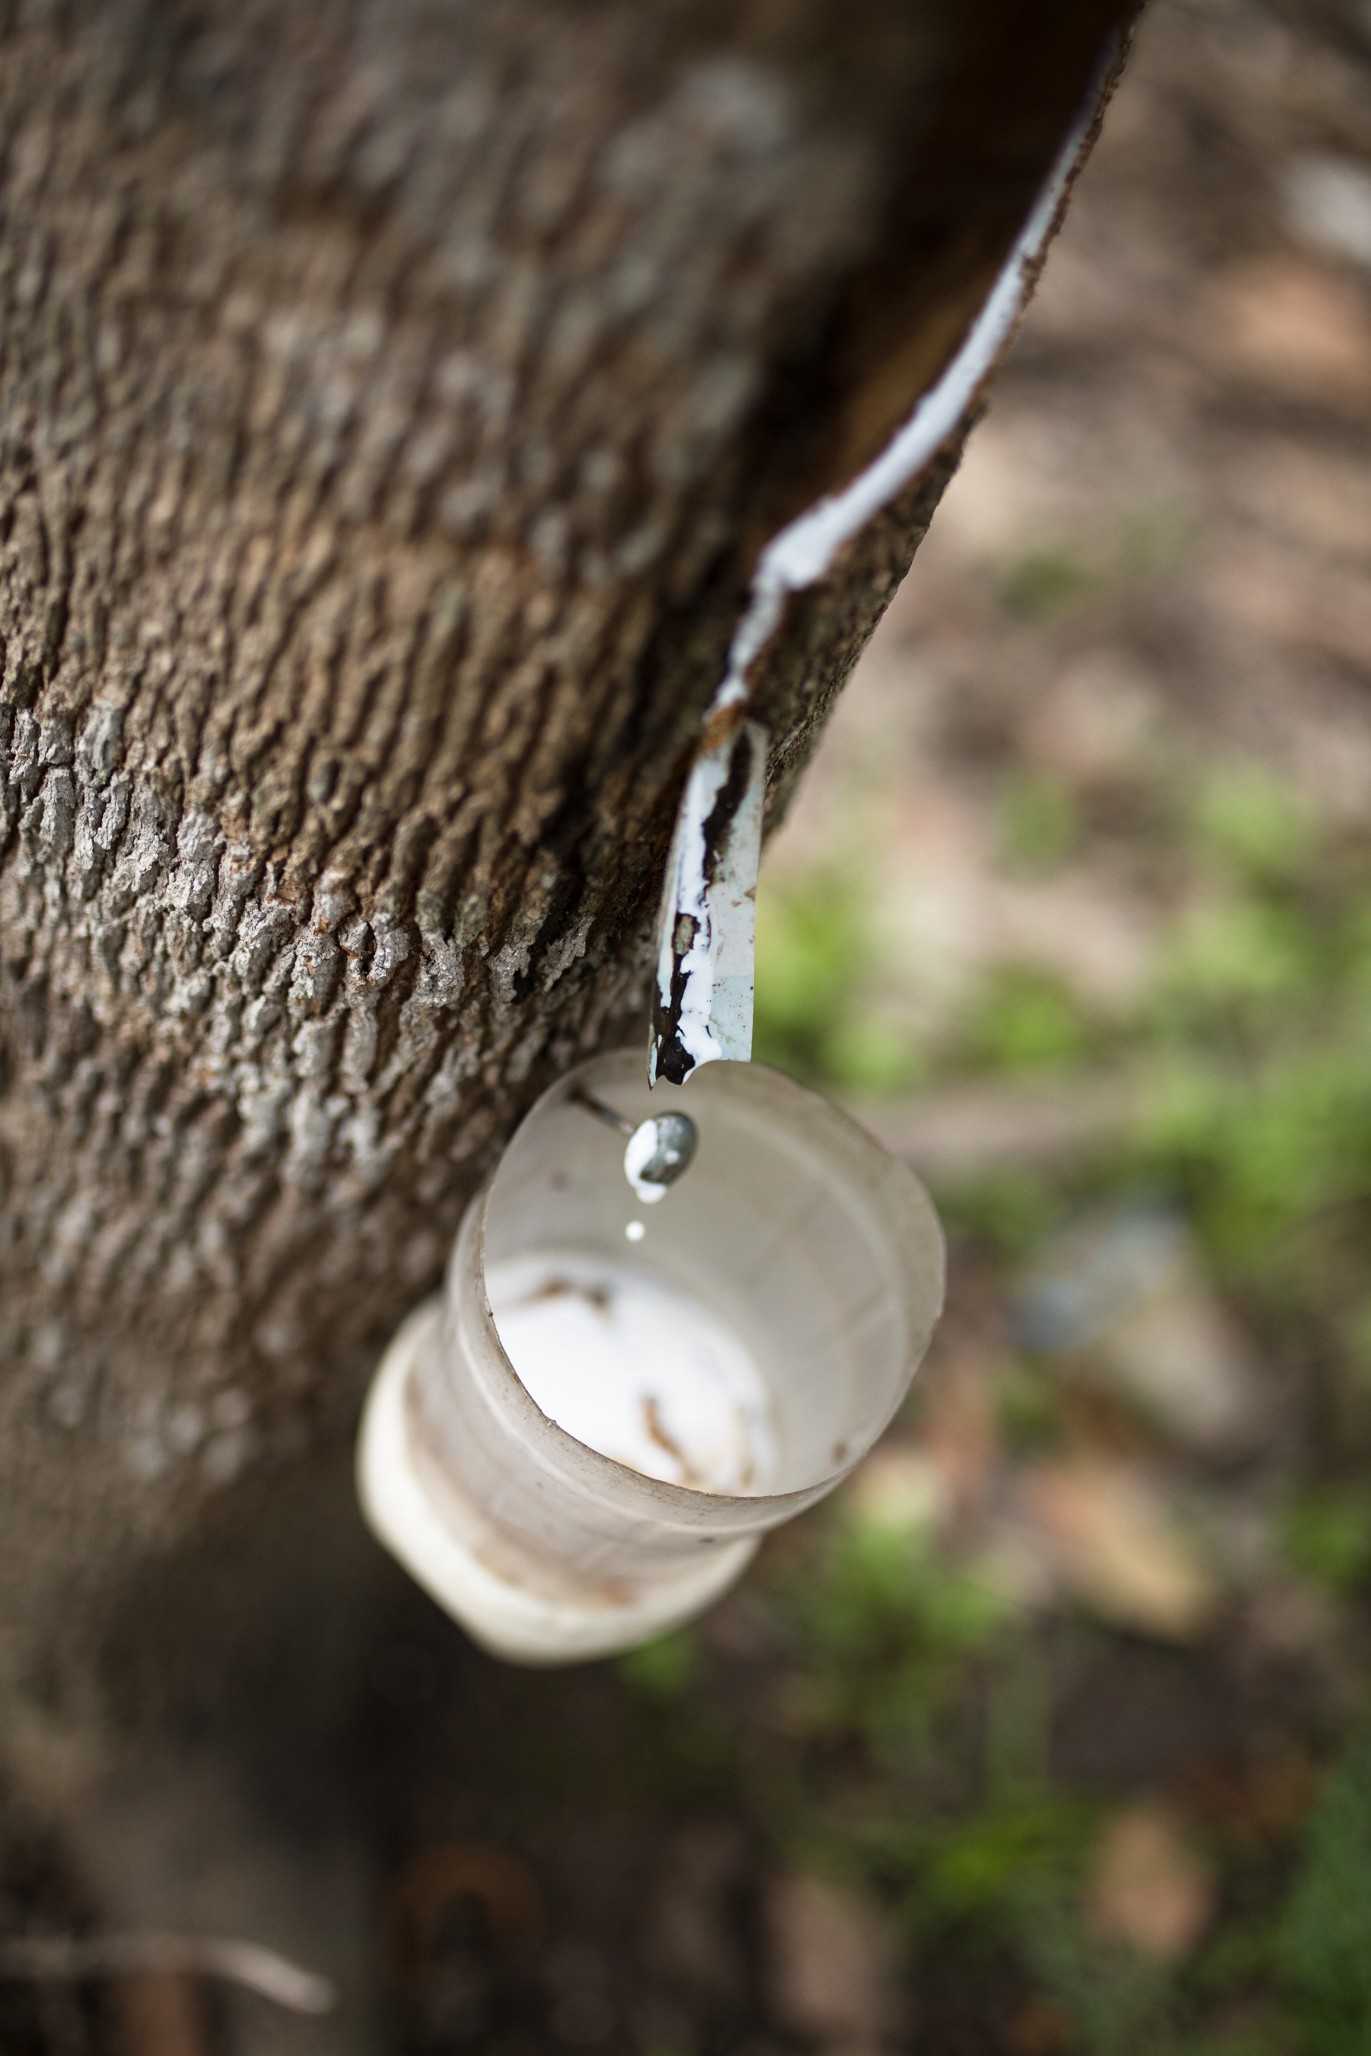 A cup attached to a rubber tree collects latex in Gunung Mas. Tapping rubber is an important source of income for the people of the district